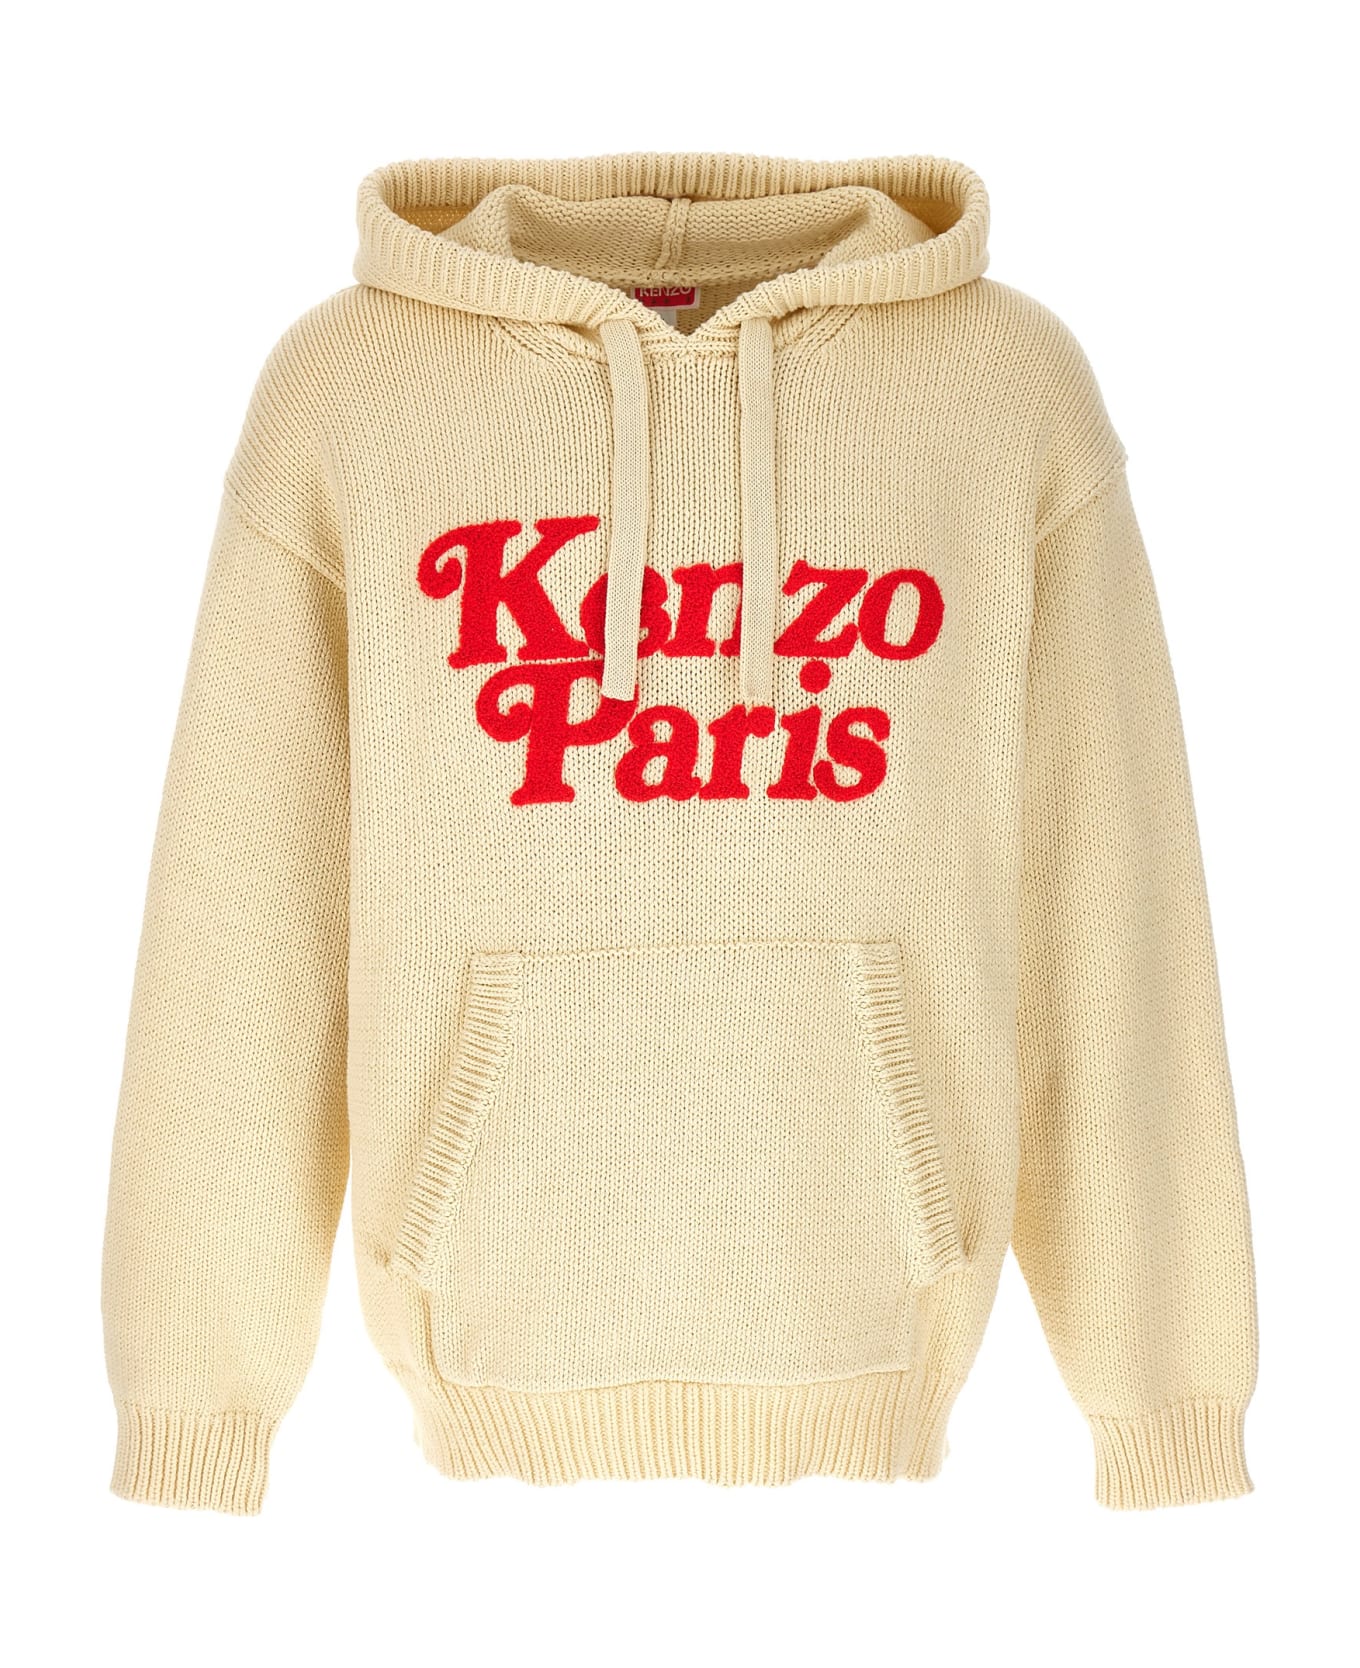 Kenzo 'kenzo By Verdy' Hooded Sweater - Off white